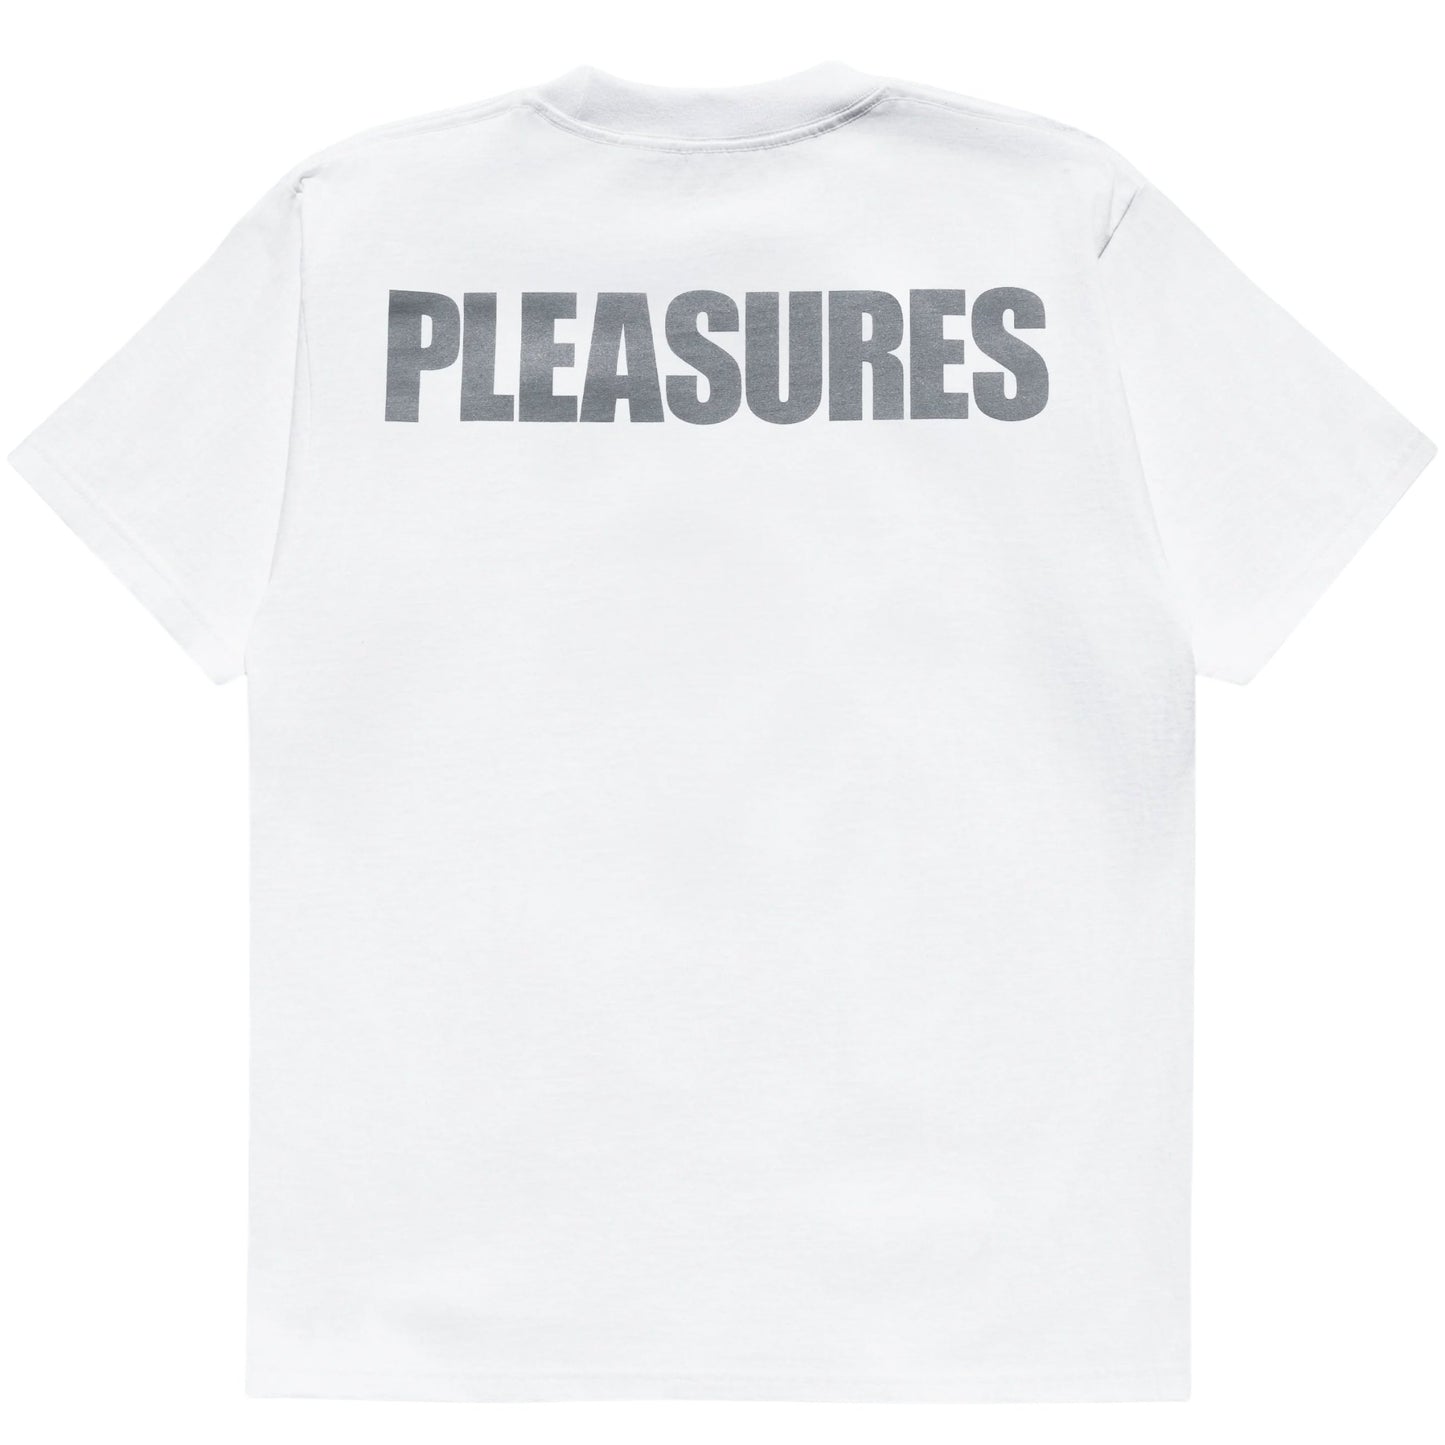 White cotton t-shirt with the word "PLEASURES" screen printed across the back in bold, capitalized letters, from the PLEASURES collaboration.